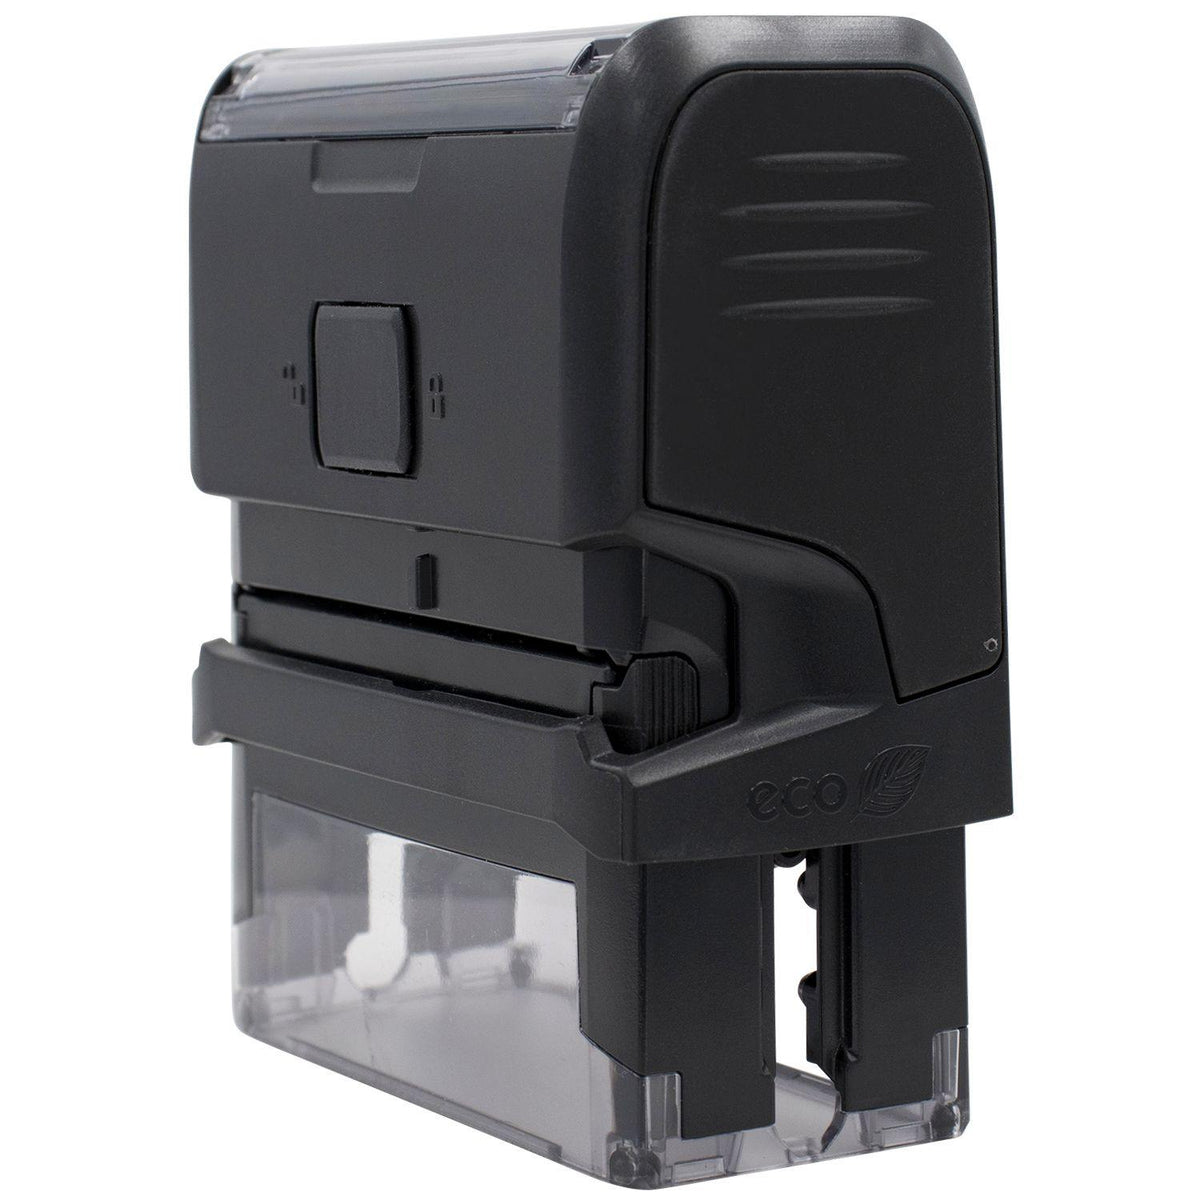 Self Inking Hmo Stamp - Engineer Seal Stamps - Brand_Trodat, Impression Size_Small, Stamp Type_Self-Inking Stamp, Type of Use_Medical Office